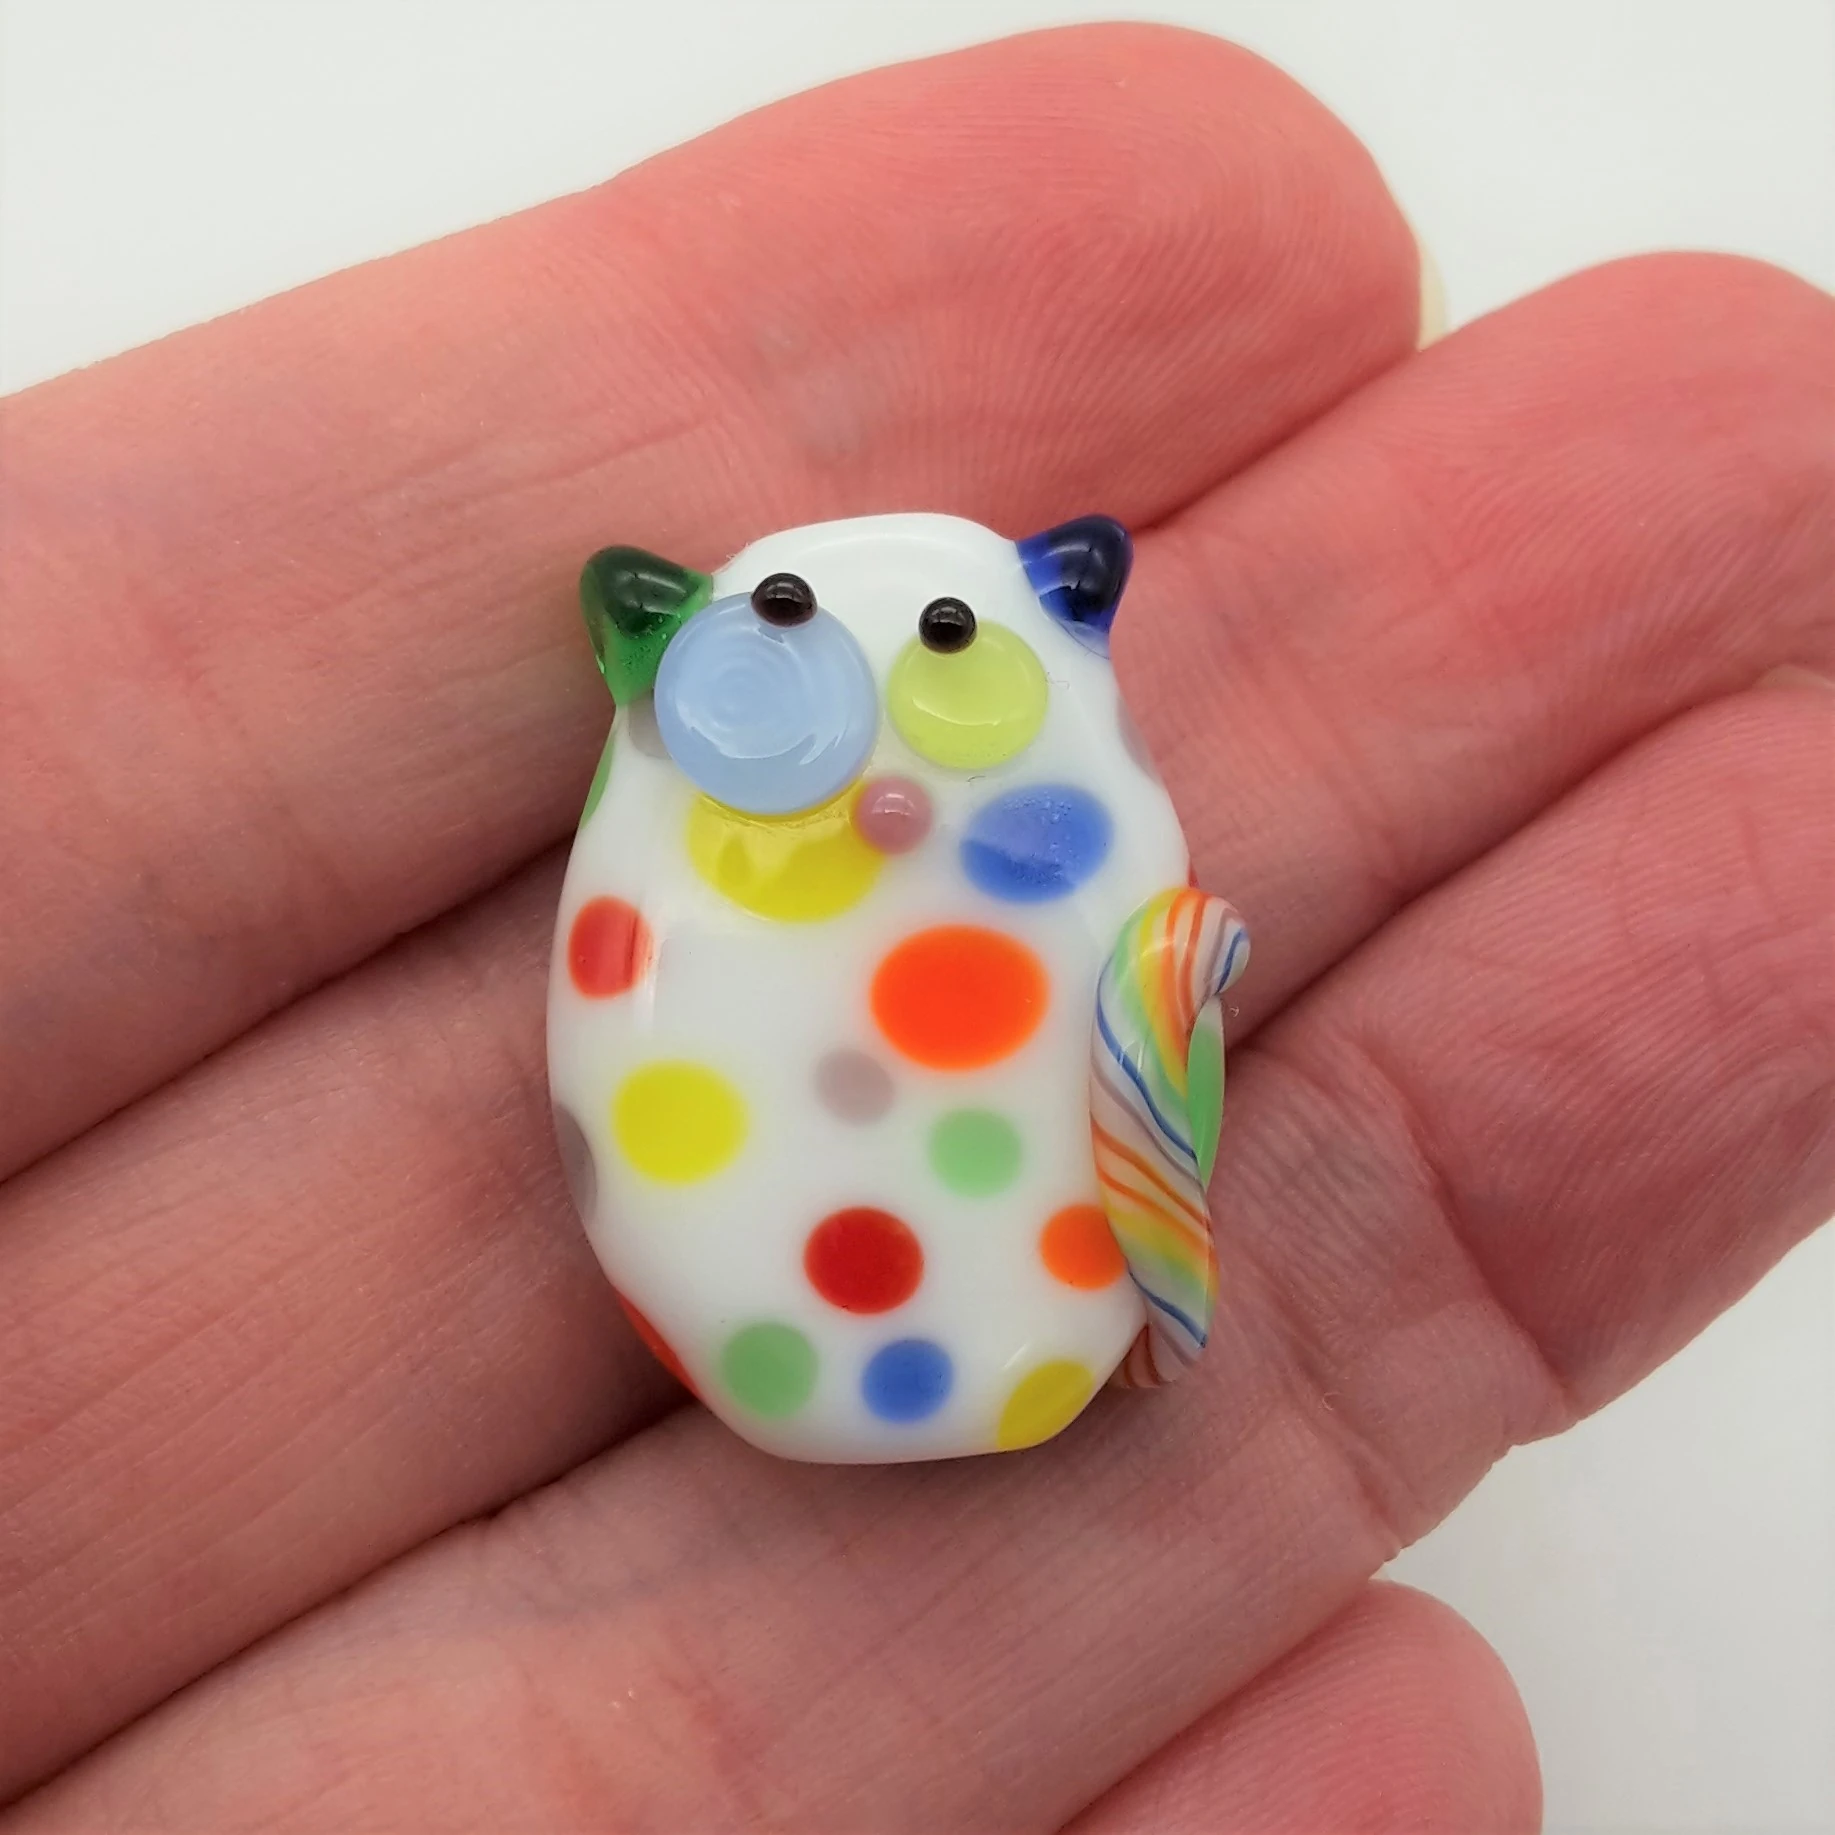 Lampwork glass bead cat with confetti dots and kooky eyes.